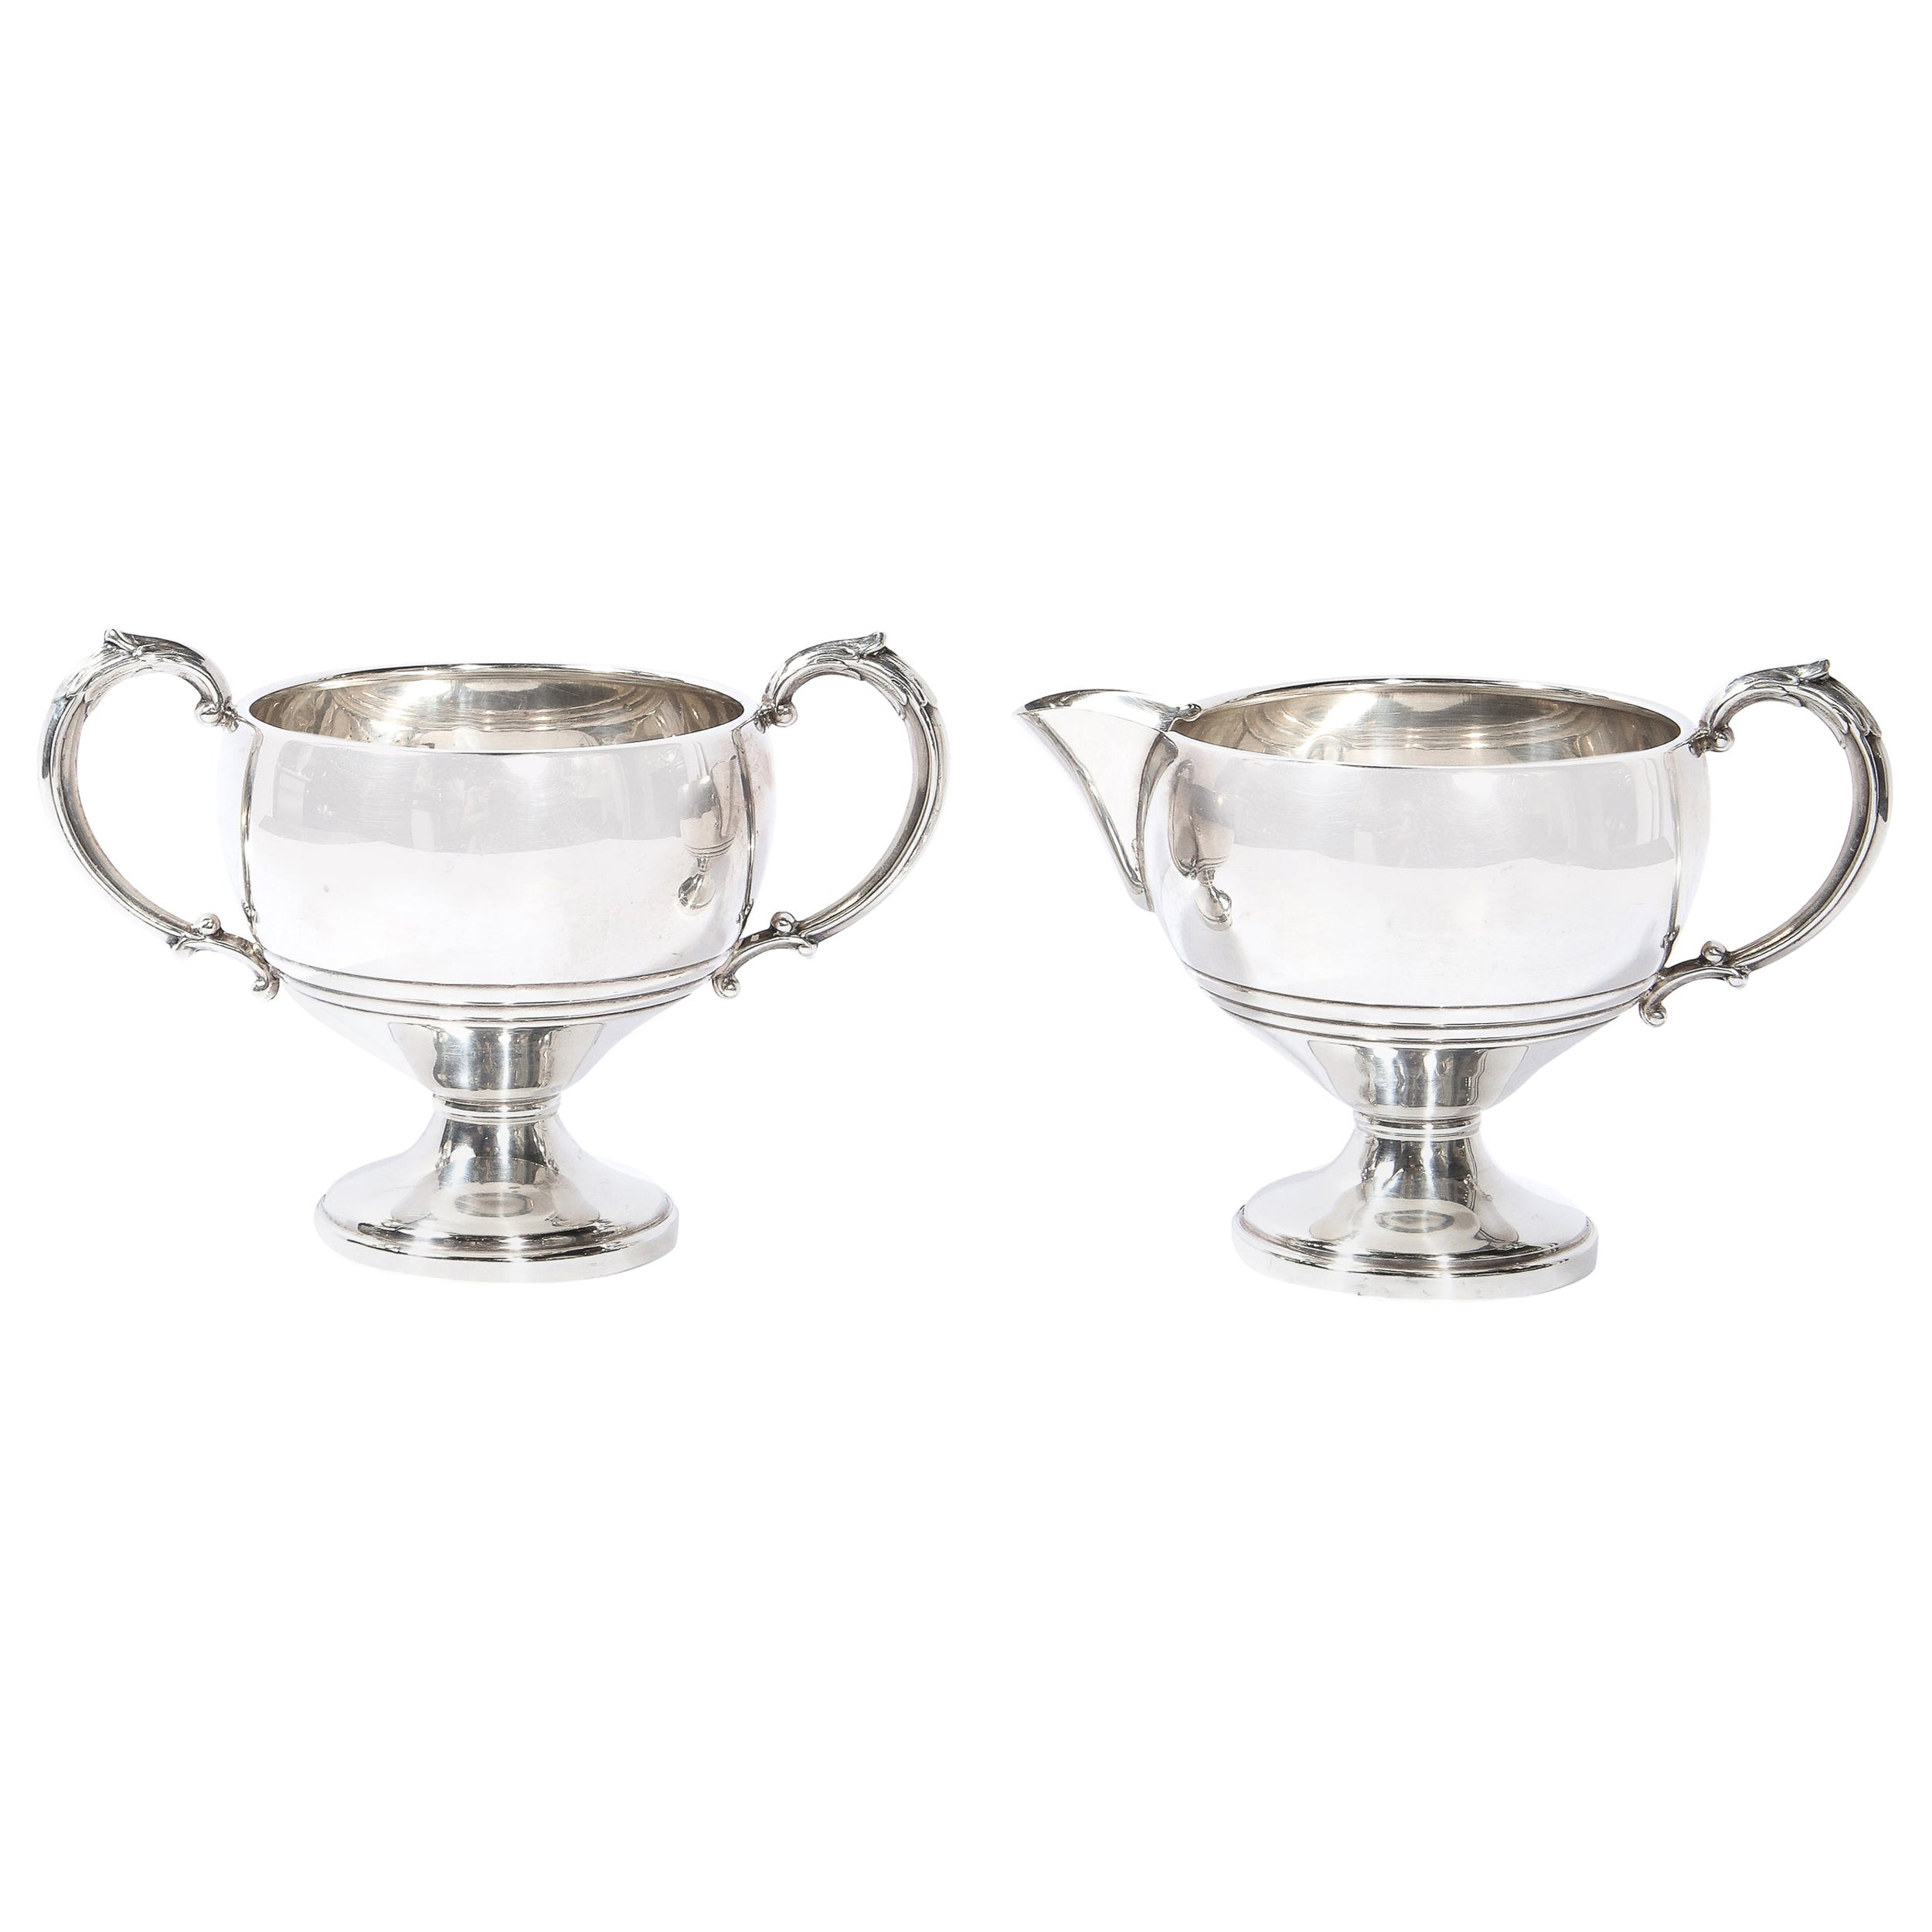 Heavy Individual Creamer Sterling Silver 1940 